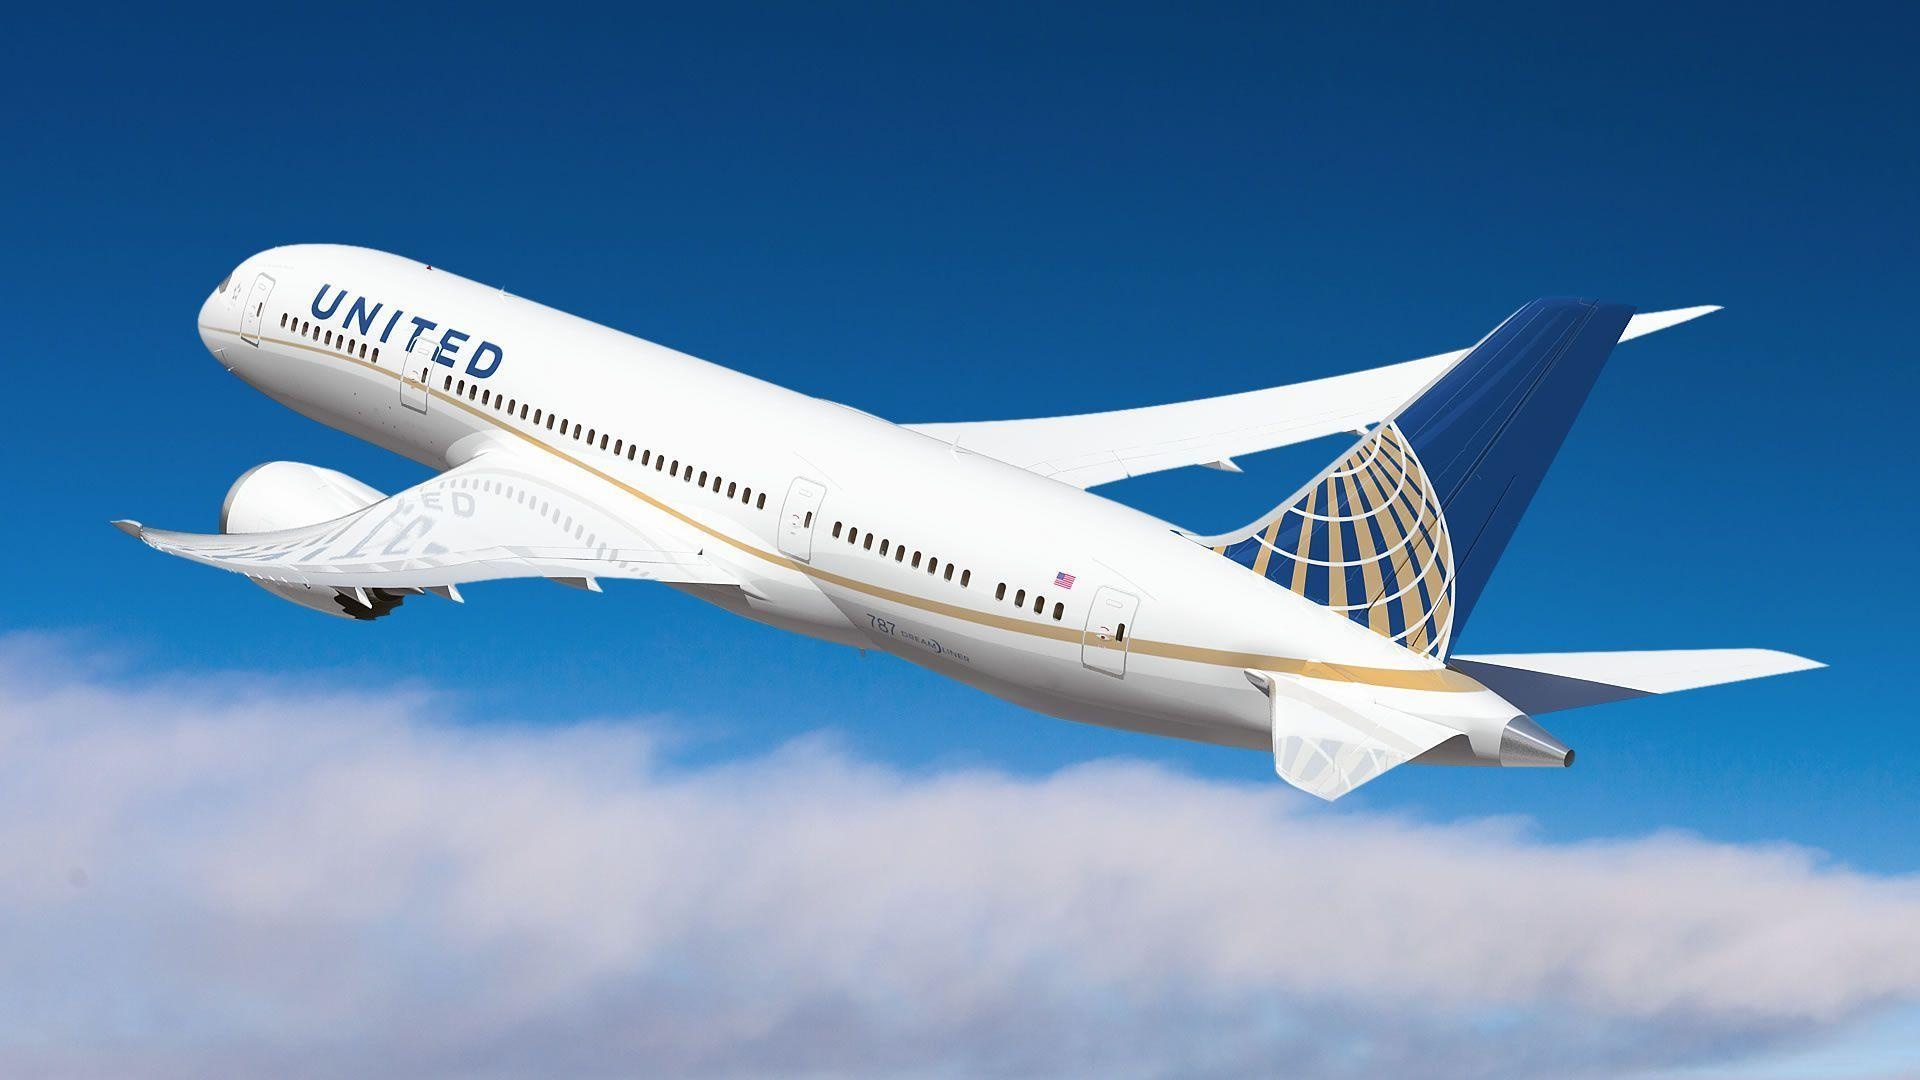 United Airlines, HD wallpapers, Airline photography, Travel backgrounds, 1920x1080 Full HD Desktop